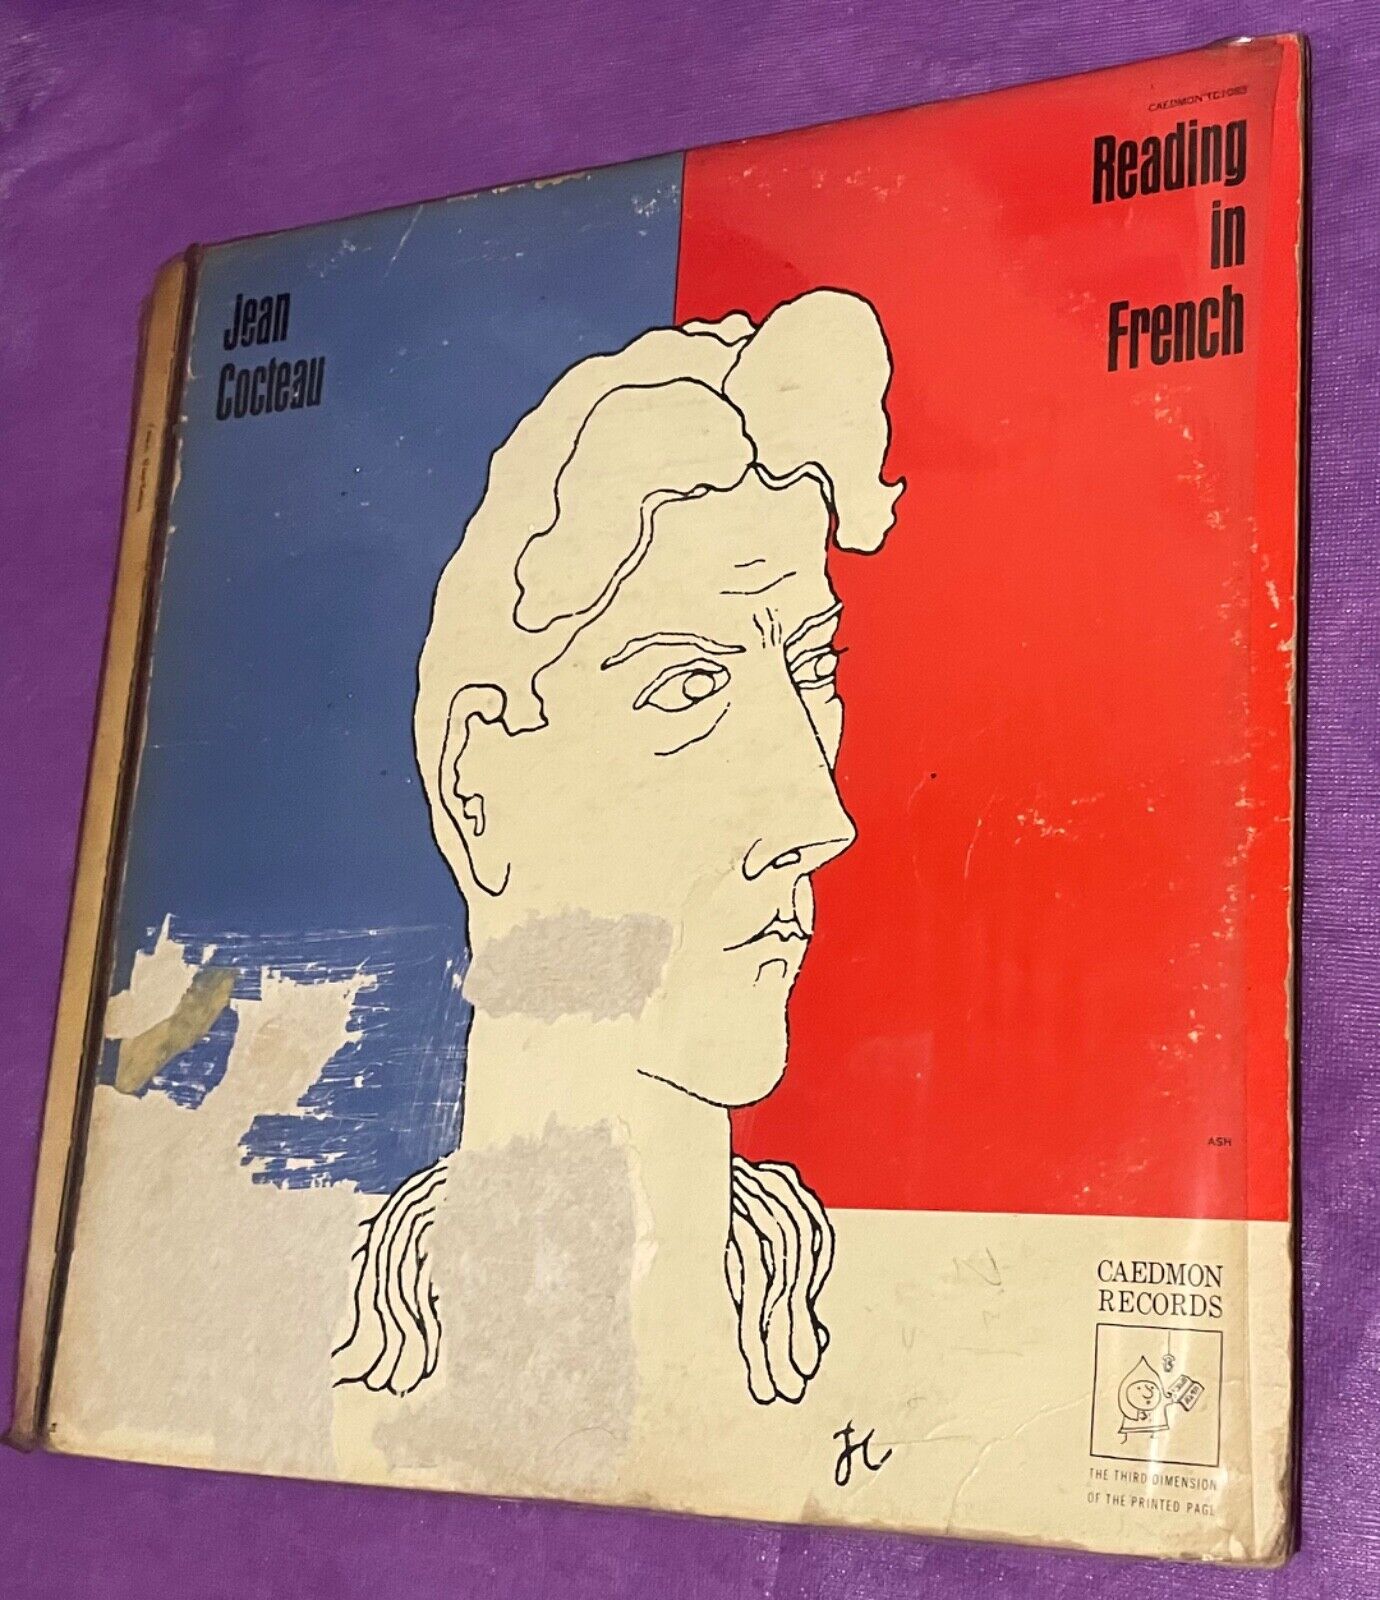 JEAN COCTEAU / READING IN FRENCH / READS HIS POETRY AND PROSE / 1962 / VINYL